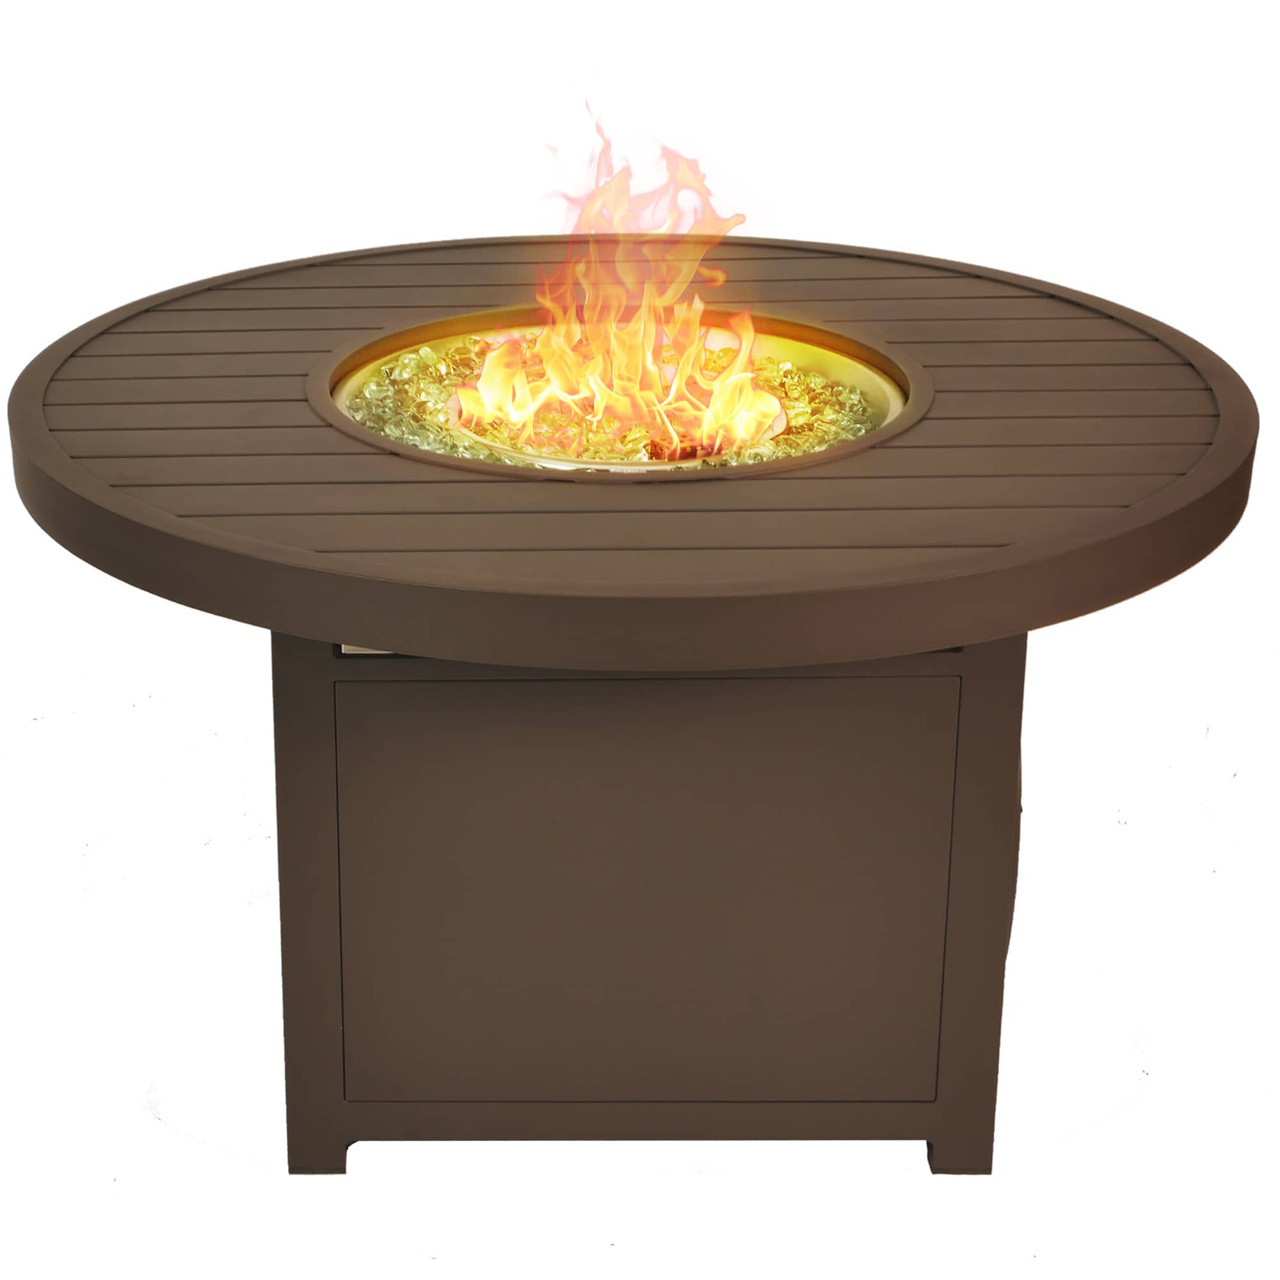 Mod Living Outdoor Round Fire Table - (42w x 42d x 24h)